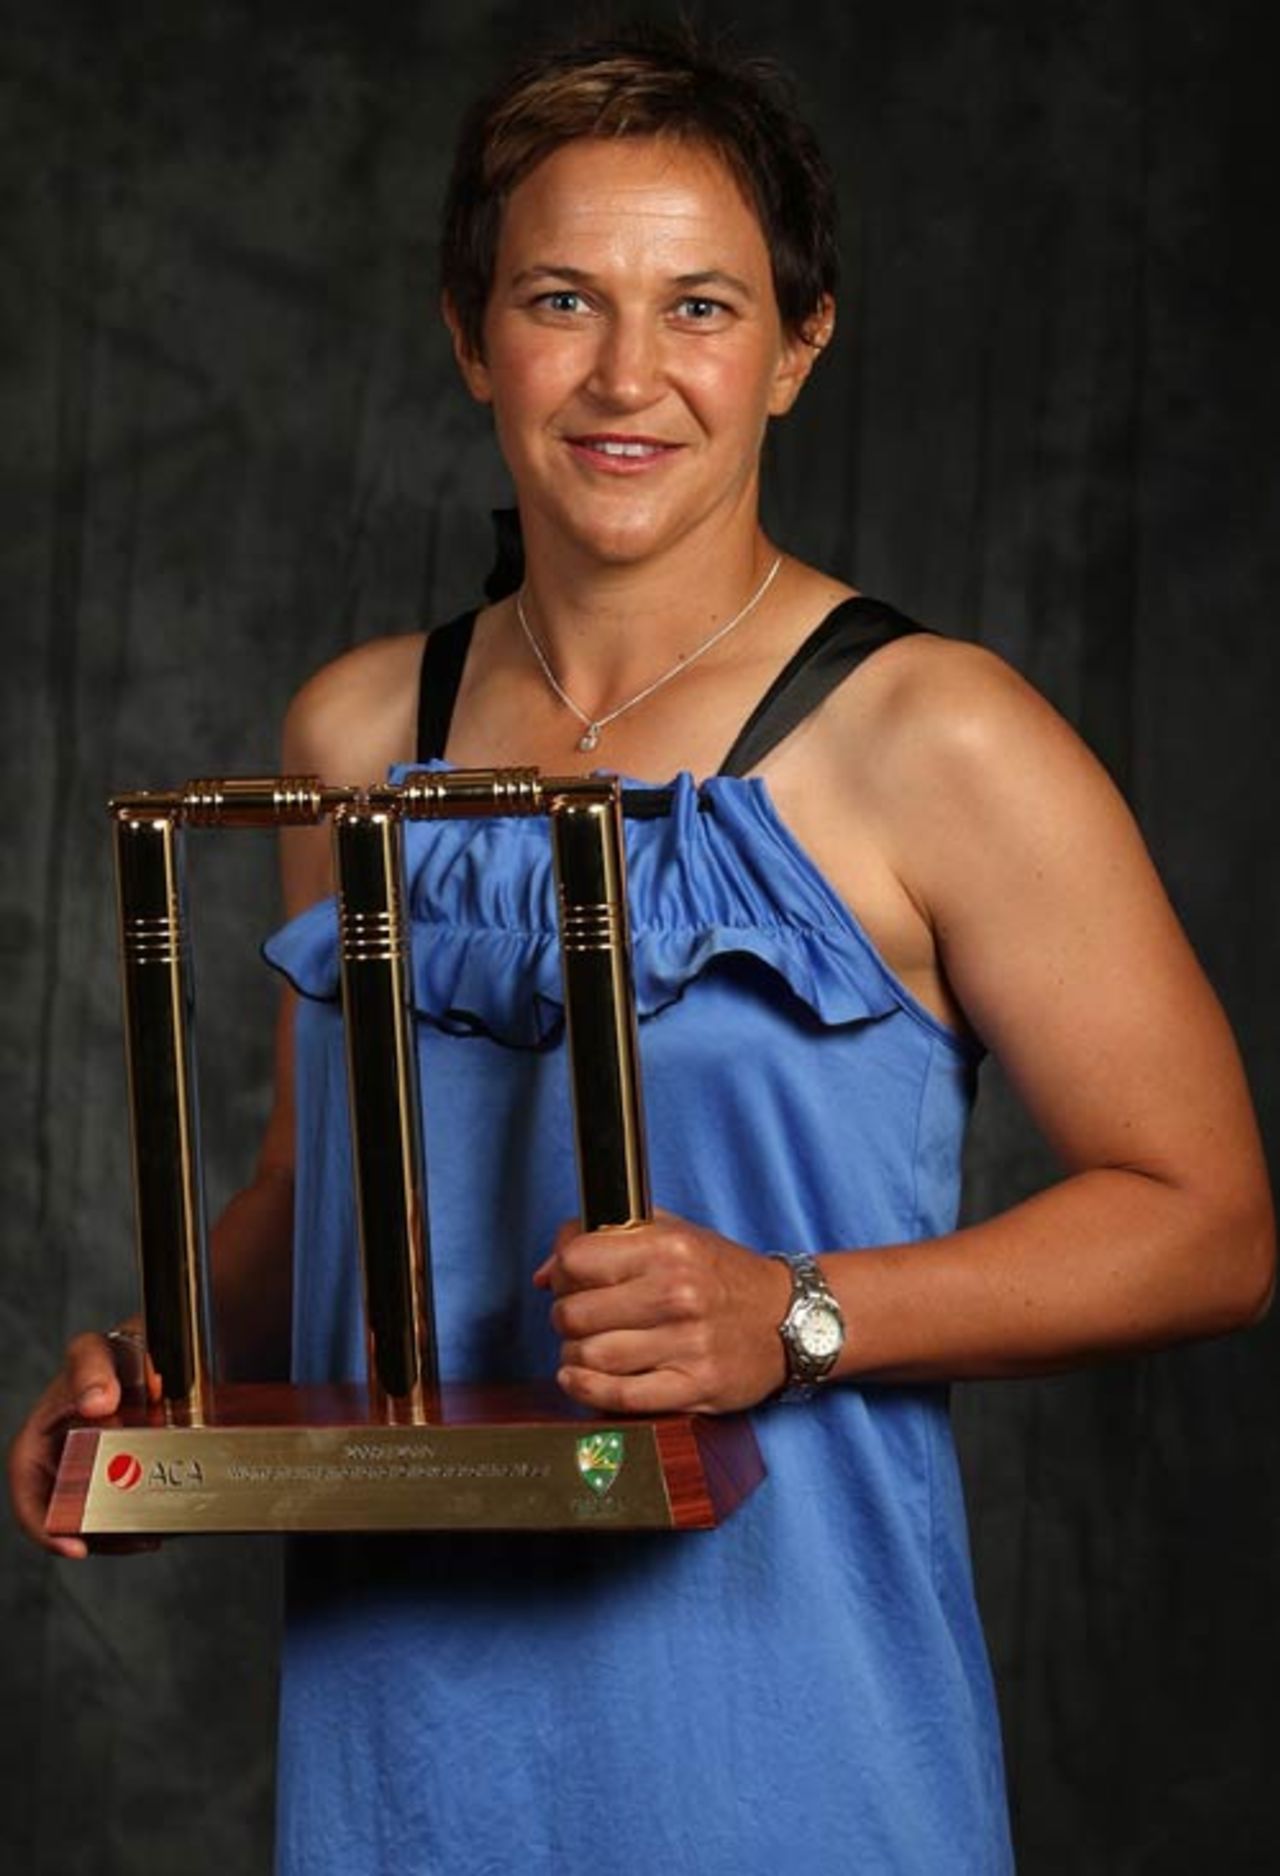 Shelley Nitschke was named the Women's International Cricketer of the Year at the Allan Border Medal night, Melbourne, February 15, 2010